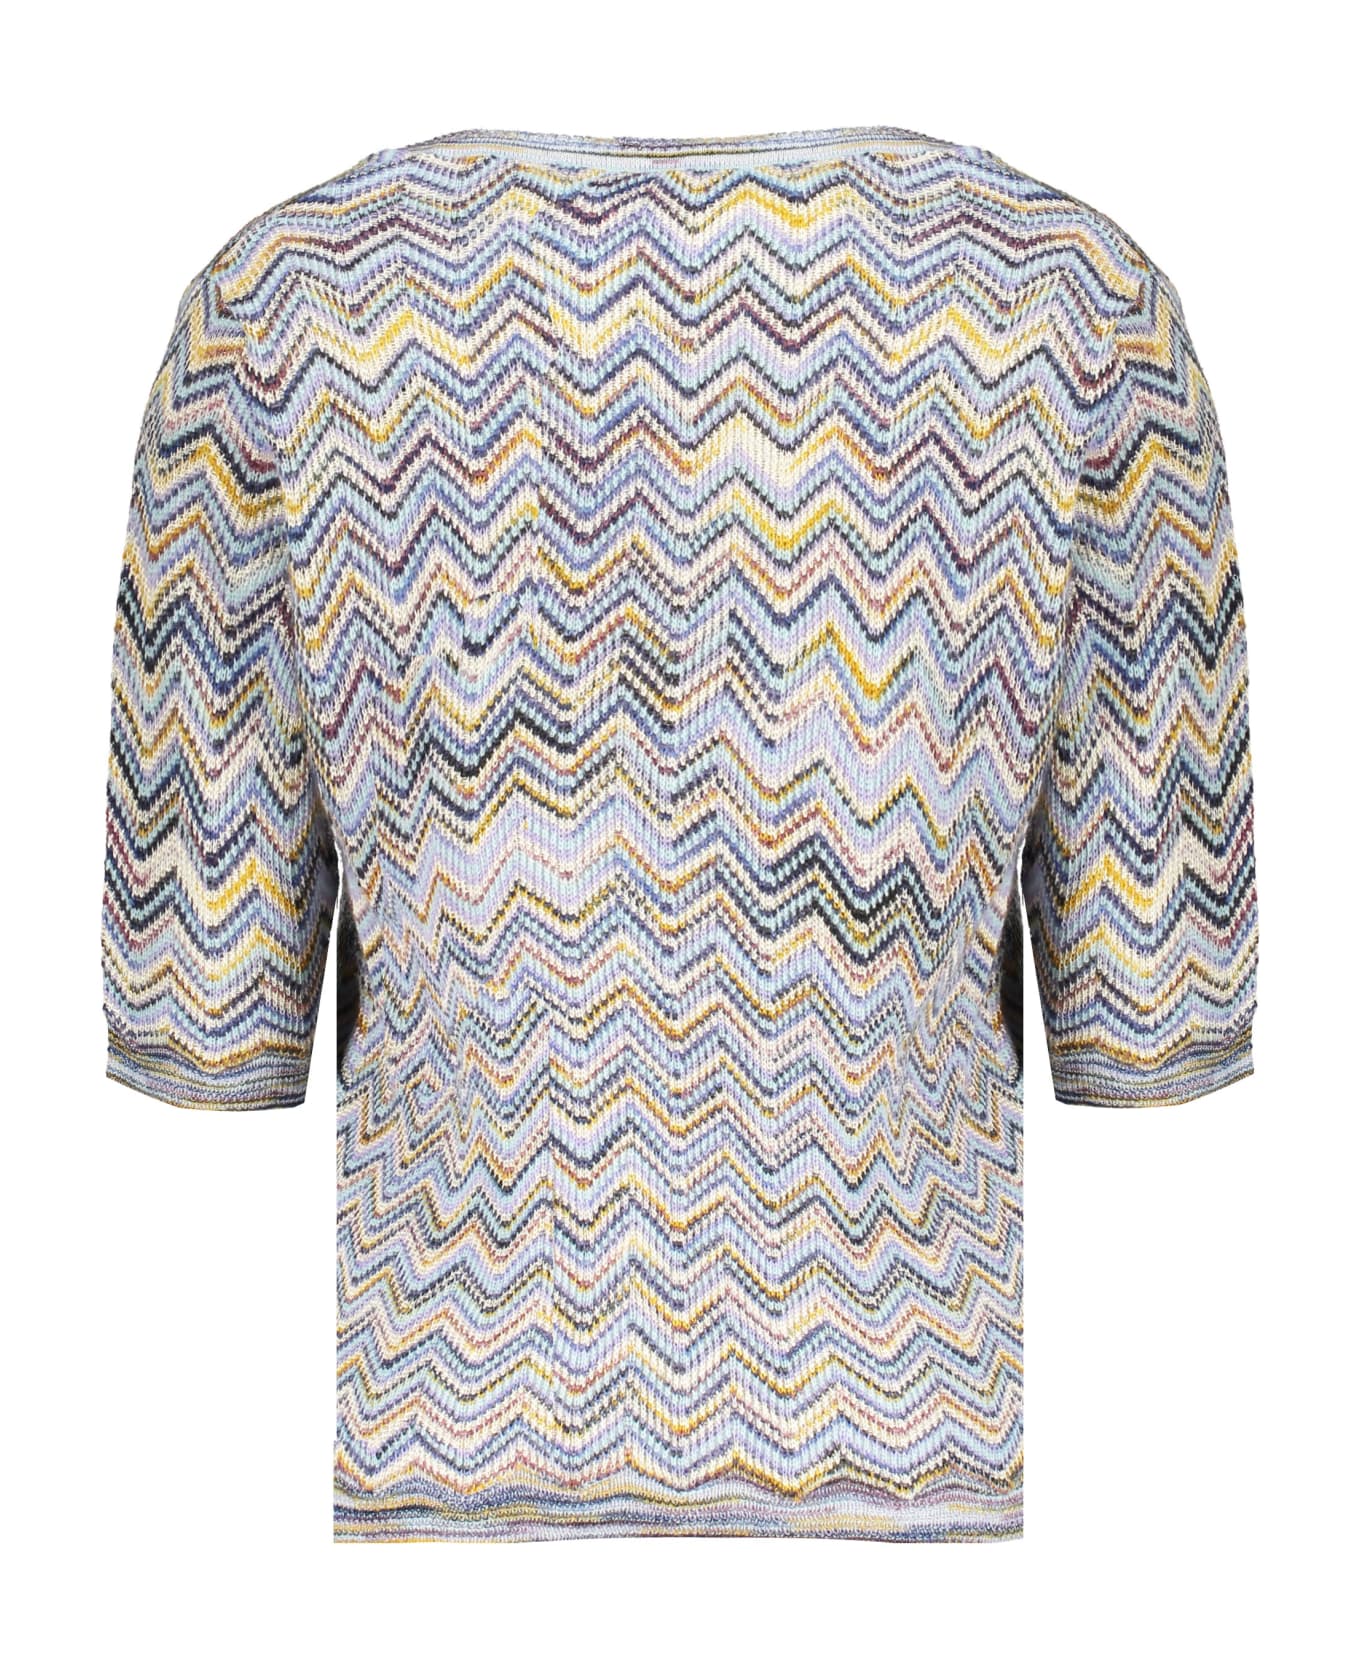 M Missoni Sweater With V-neck - blue